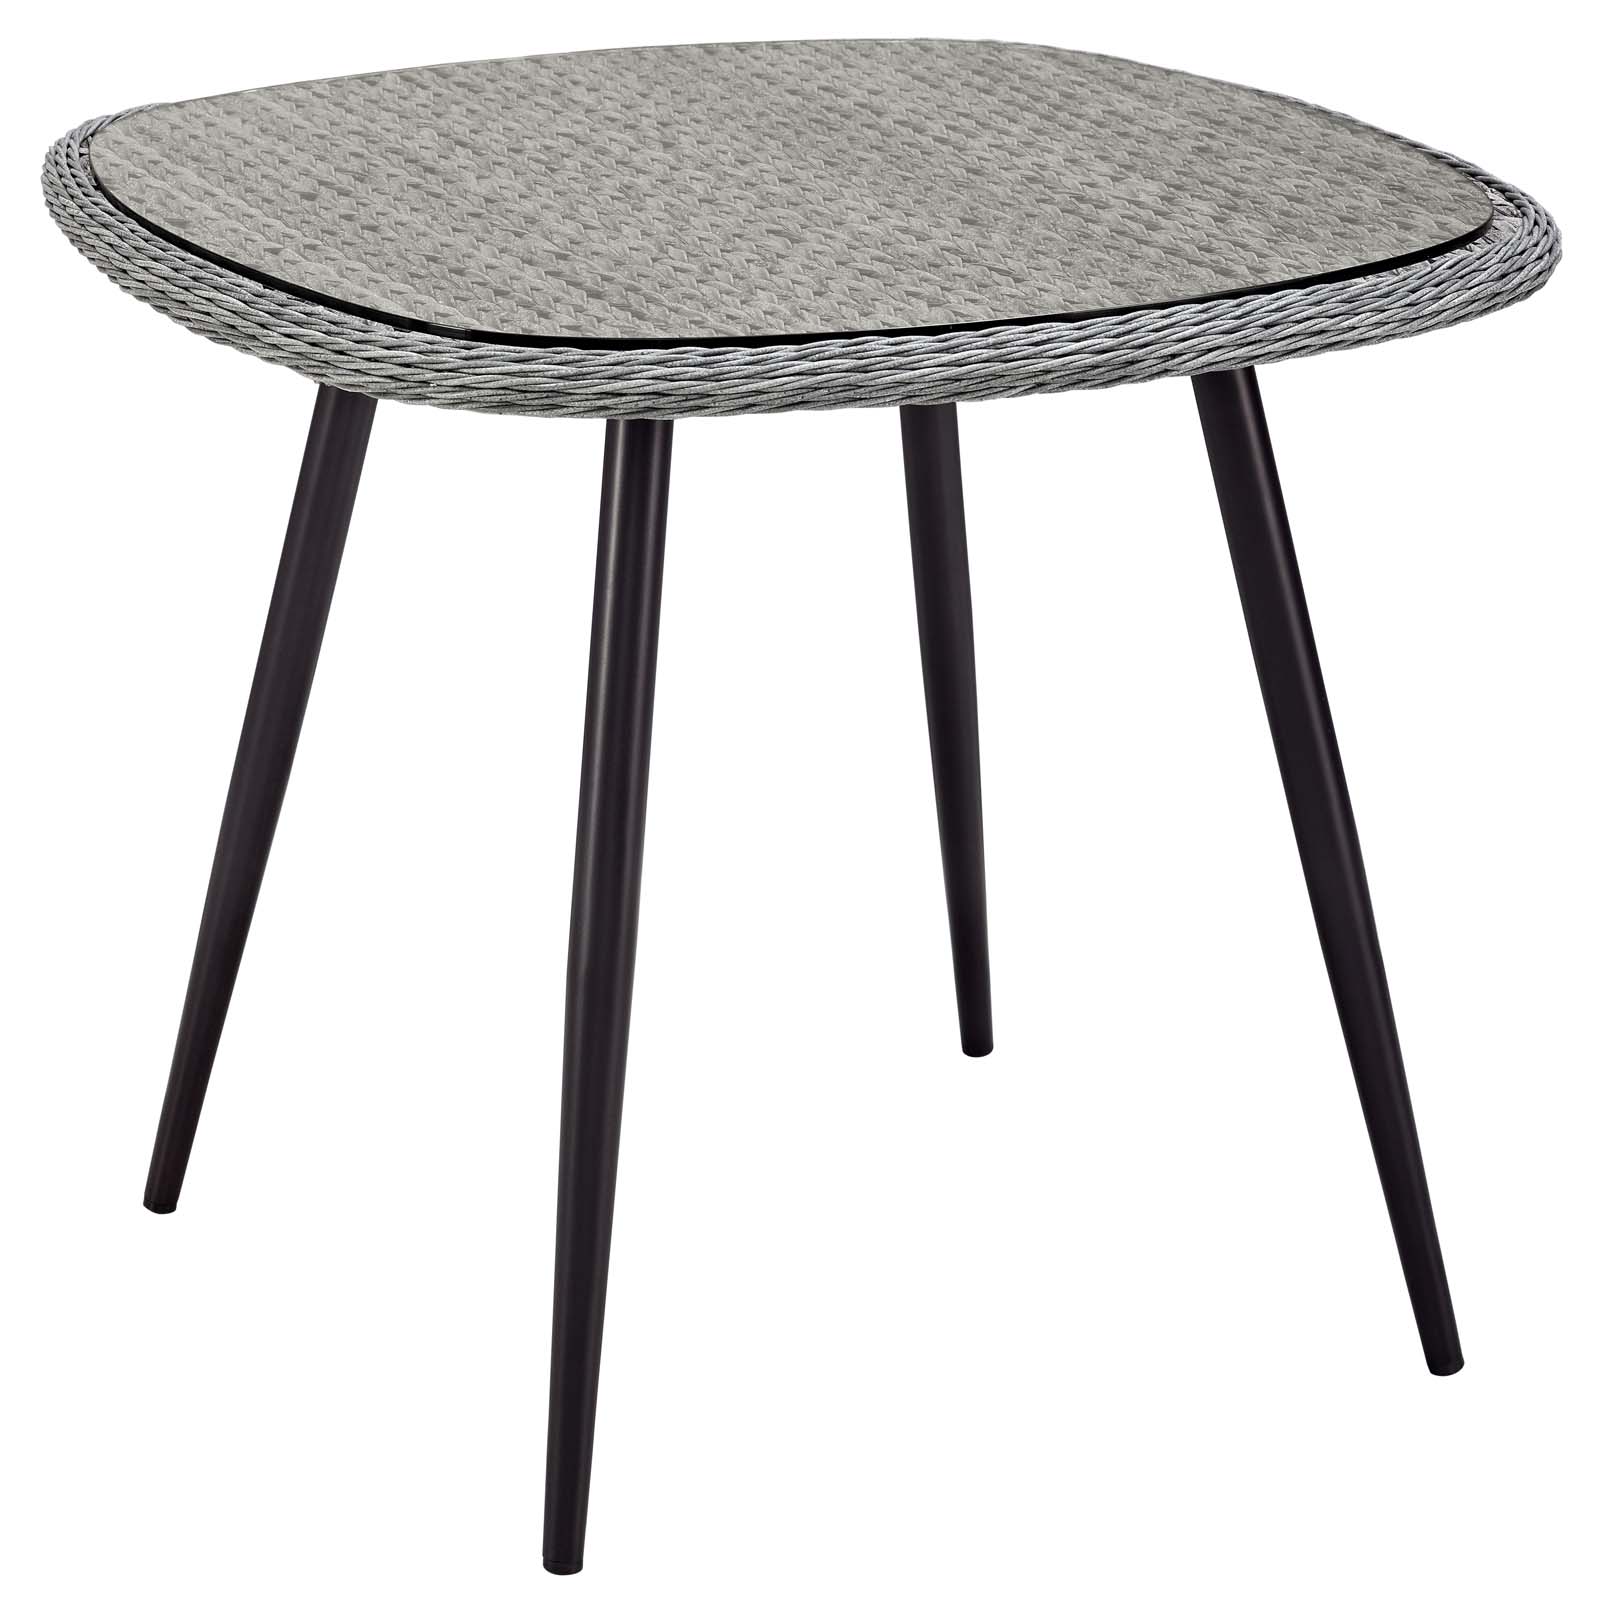 Modway Endeavor 36" Outdoor Patio Wicker Rattan Dining Table in Gray - image 2 of 5